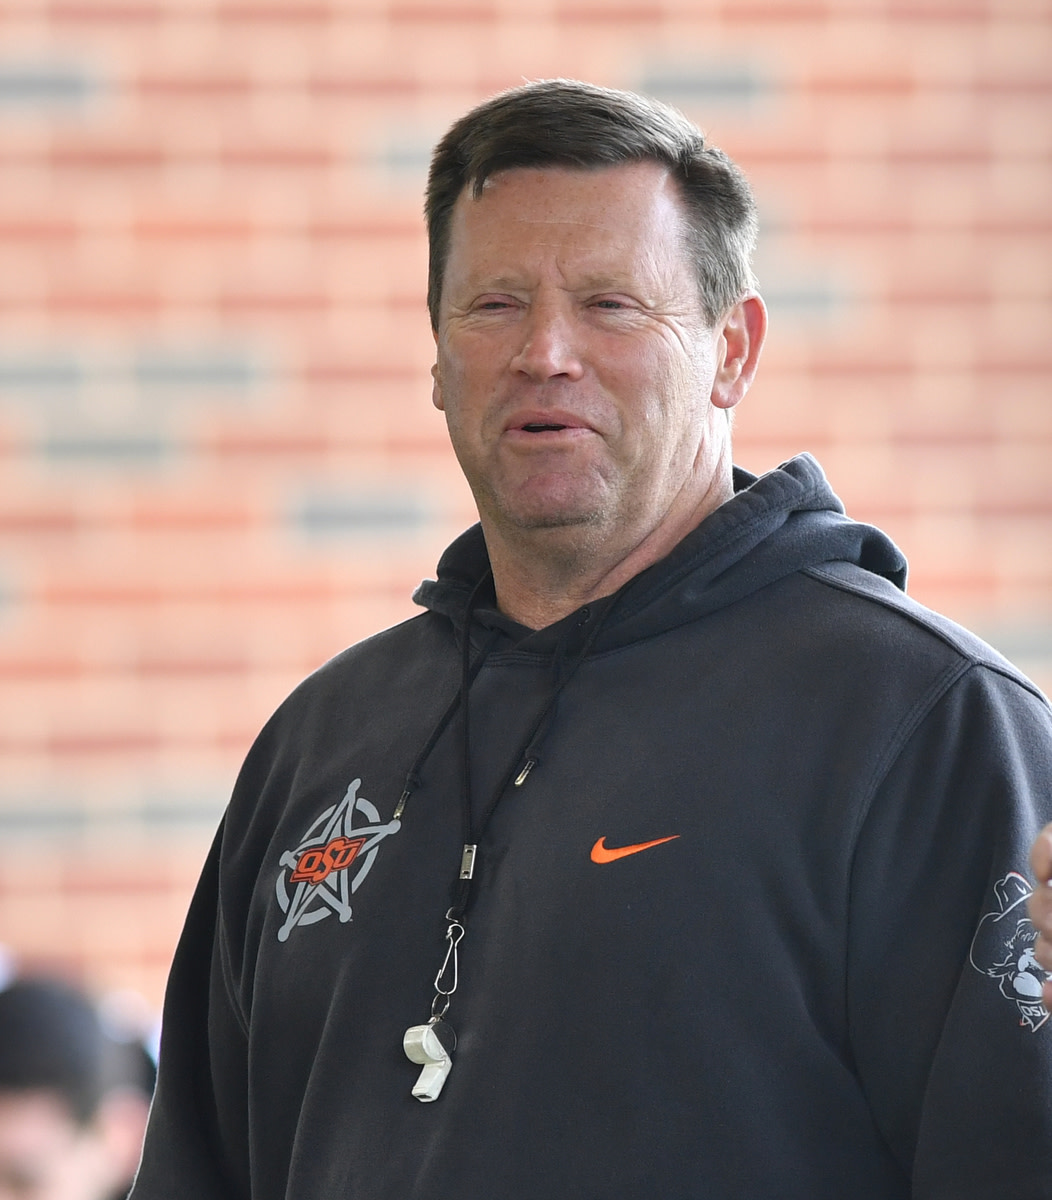 Rob Glass brought the Competition Day idea with him from Florida and it has flourished at Oklahoma State.